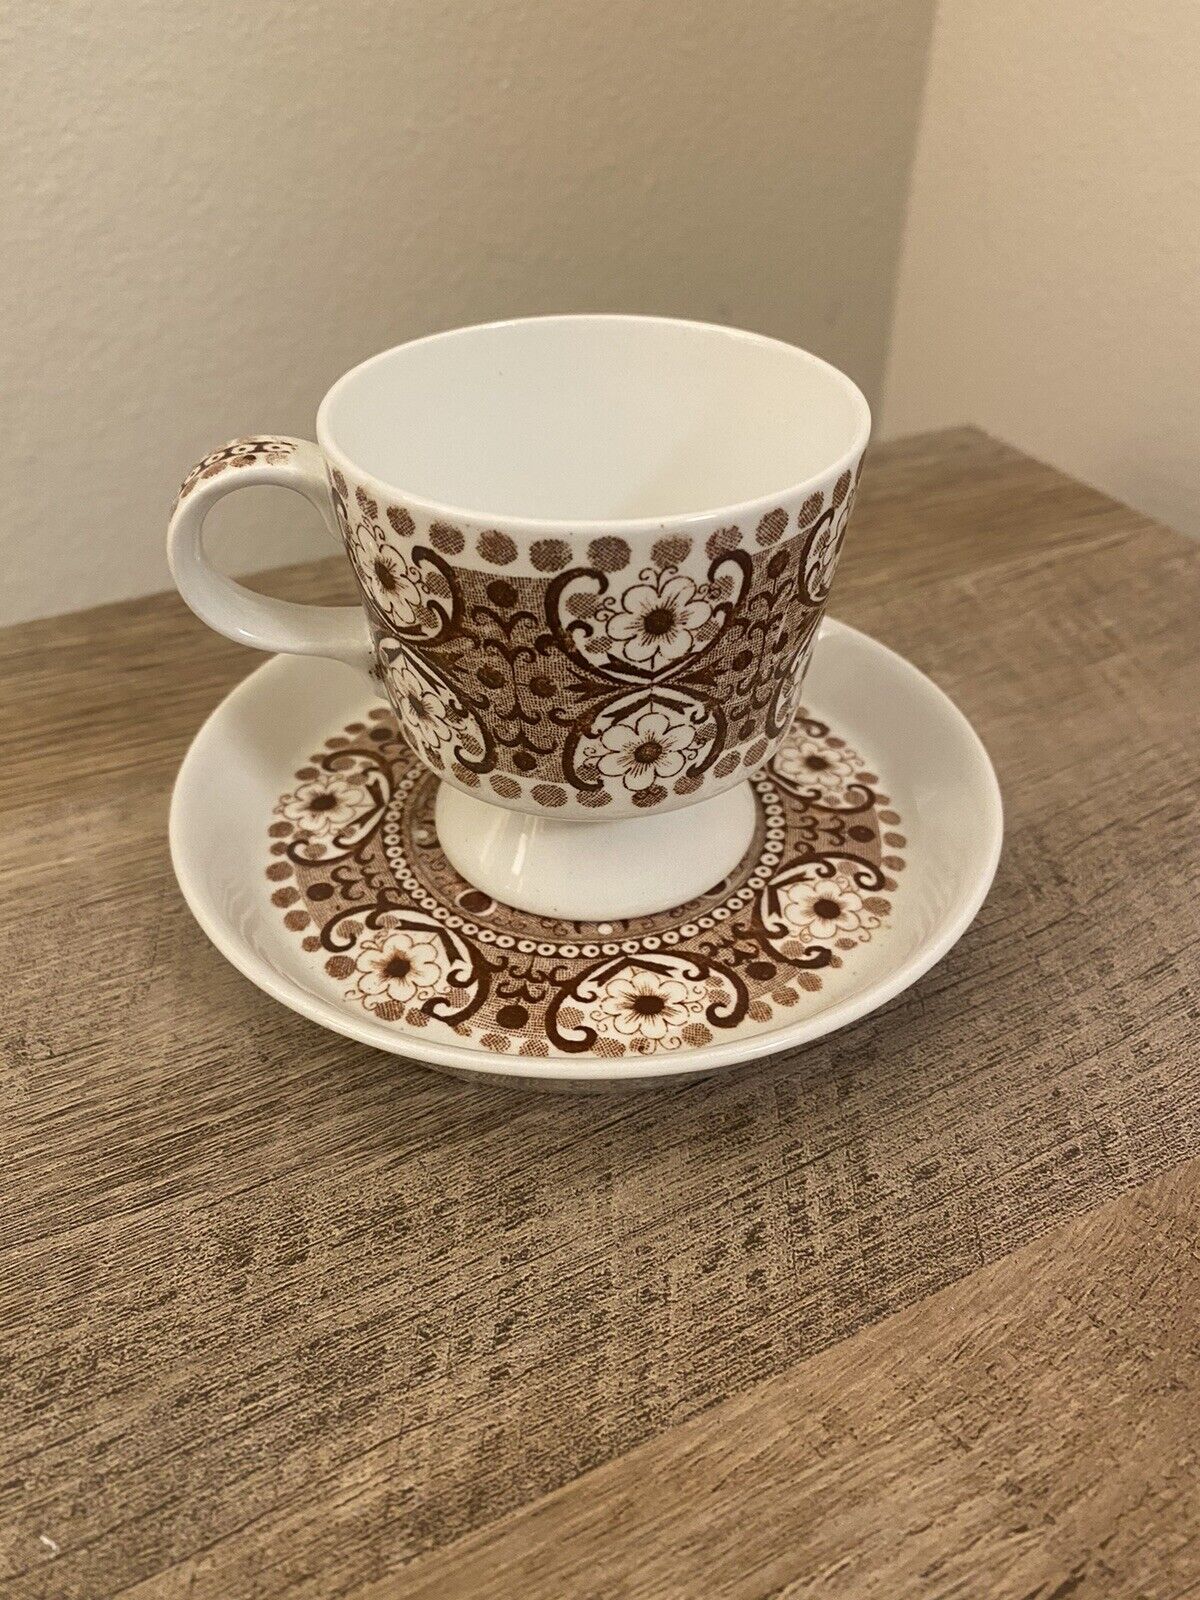 Arabia Finland Tea Cup and Saucer Brown and White Demitasse Vintage Floral